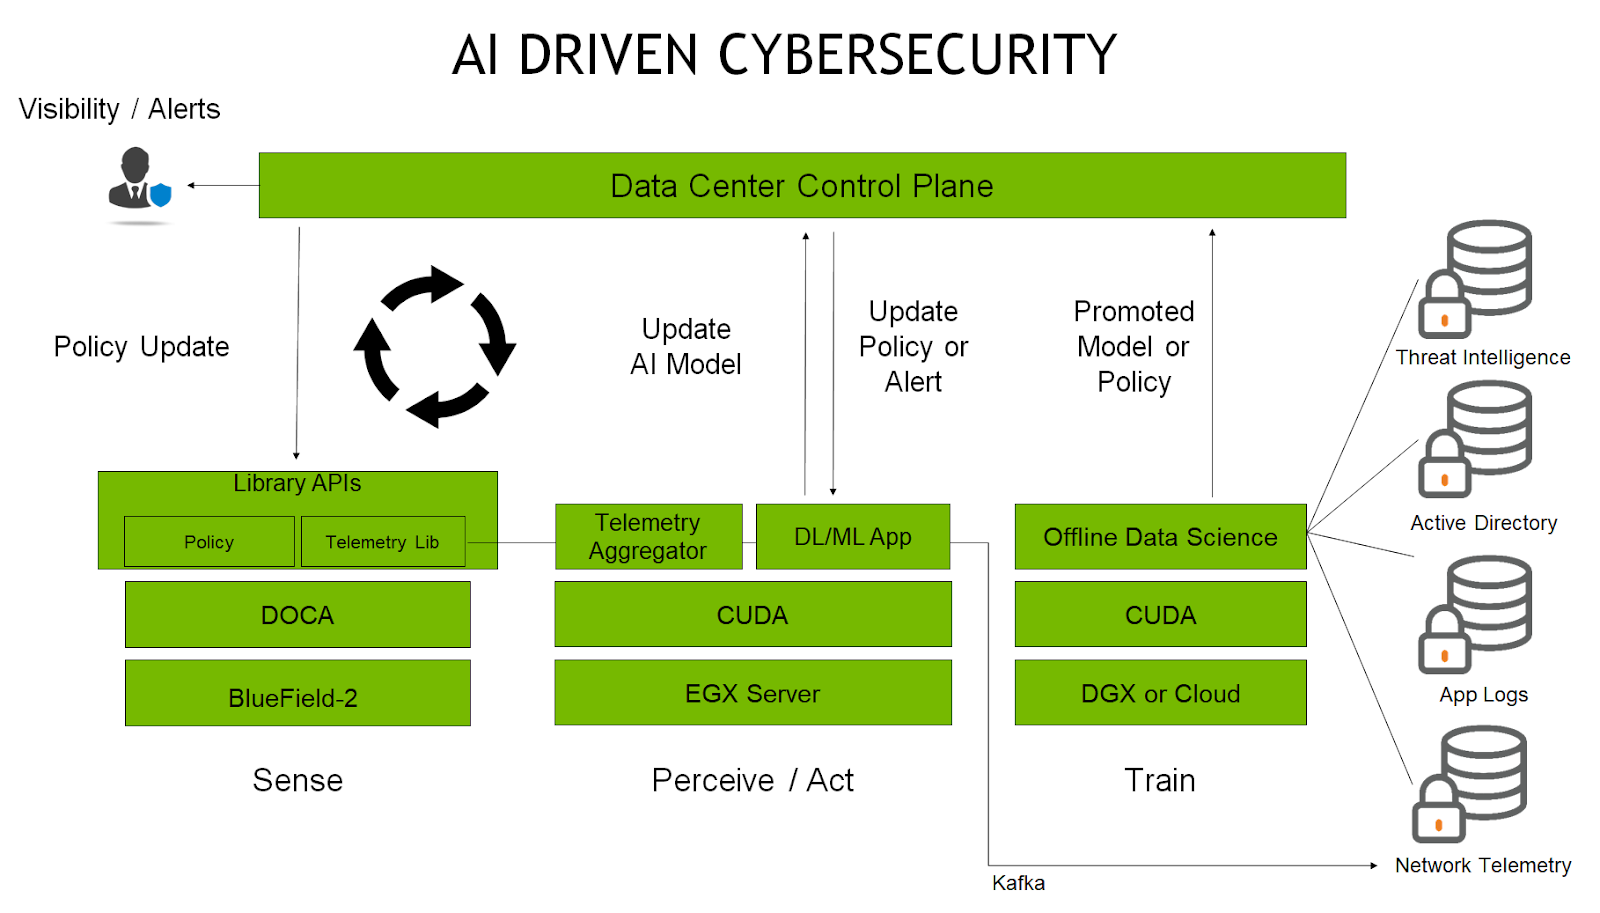 NVIDIA's cybersecurity framework is AI driven to provide a powerful solution to detect and eliminate security threats. 